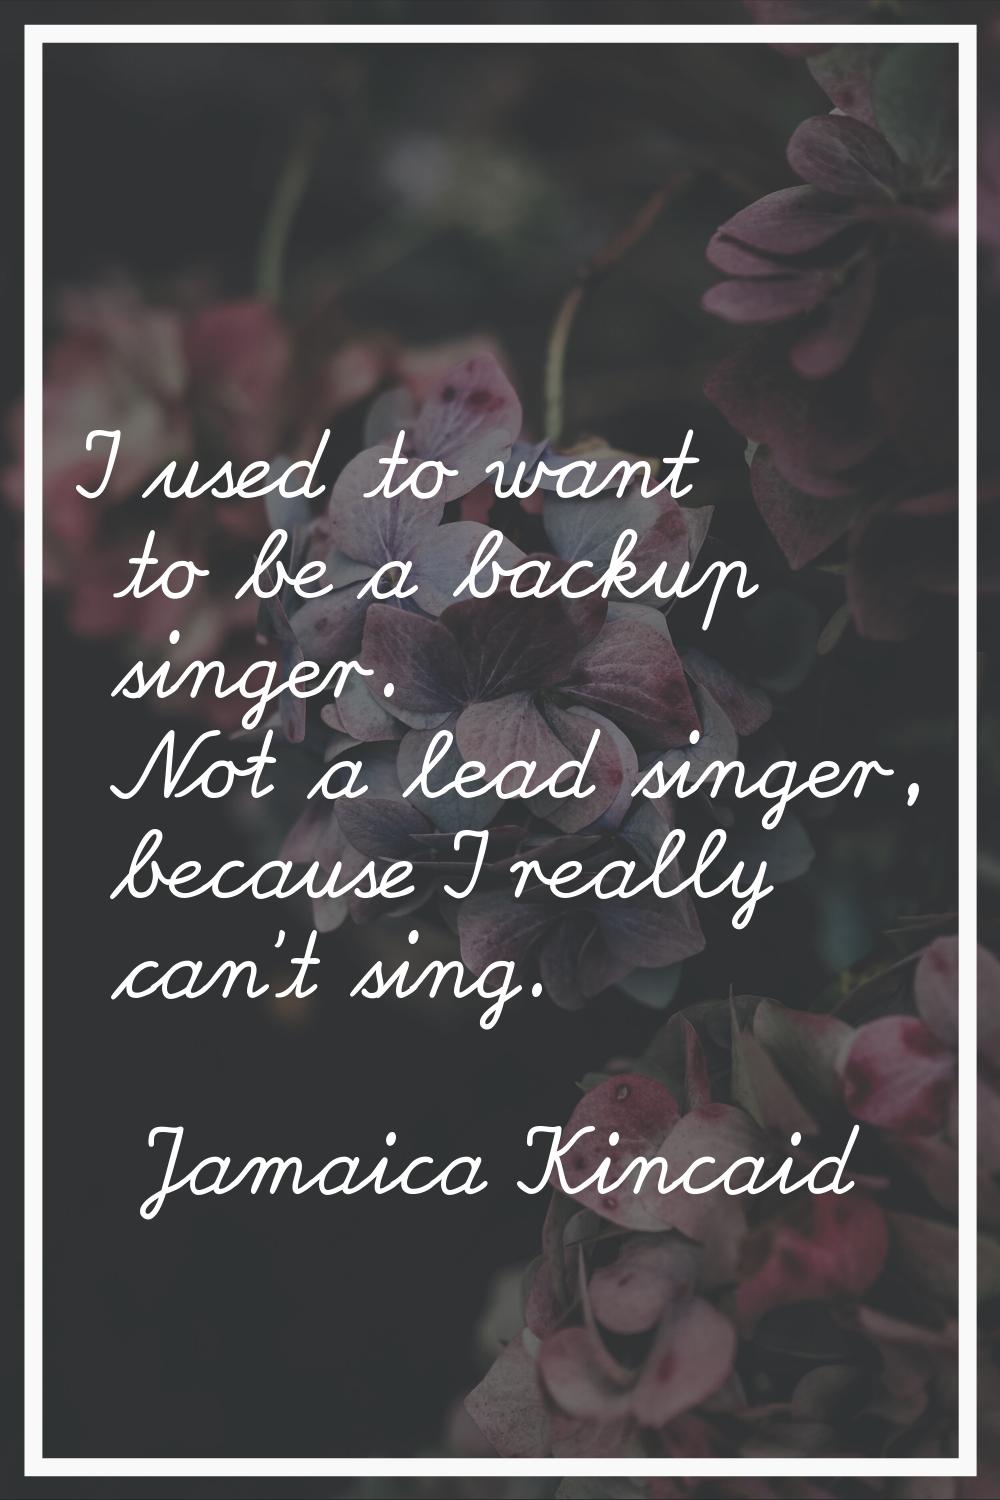 I used to want to be a backup singer. Not a lead singer, because I really can't sing.